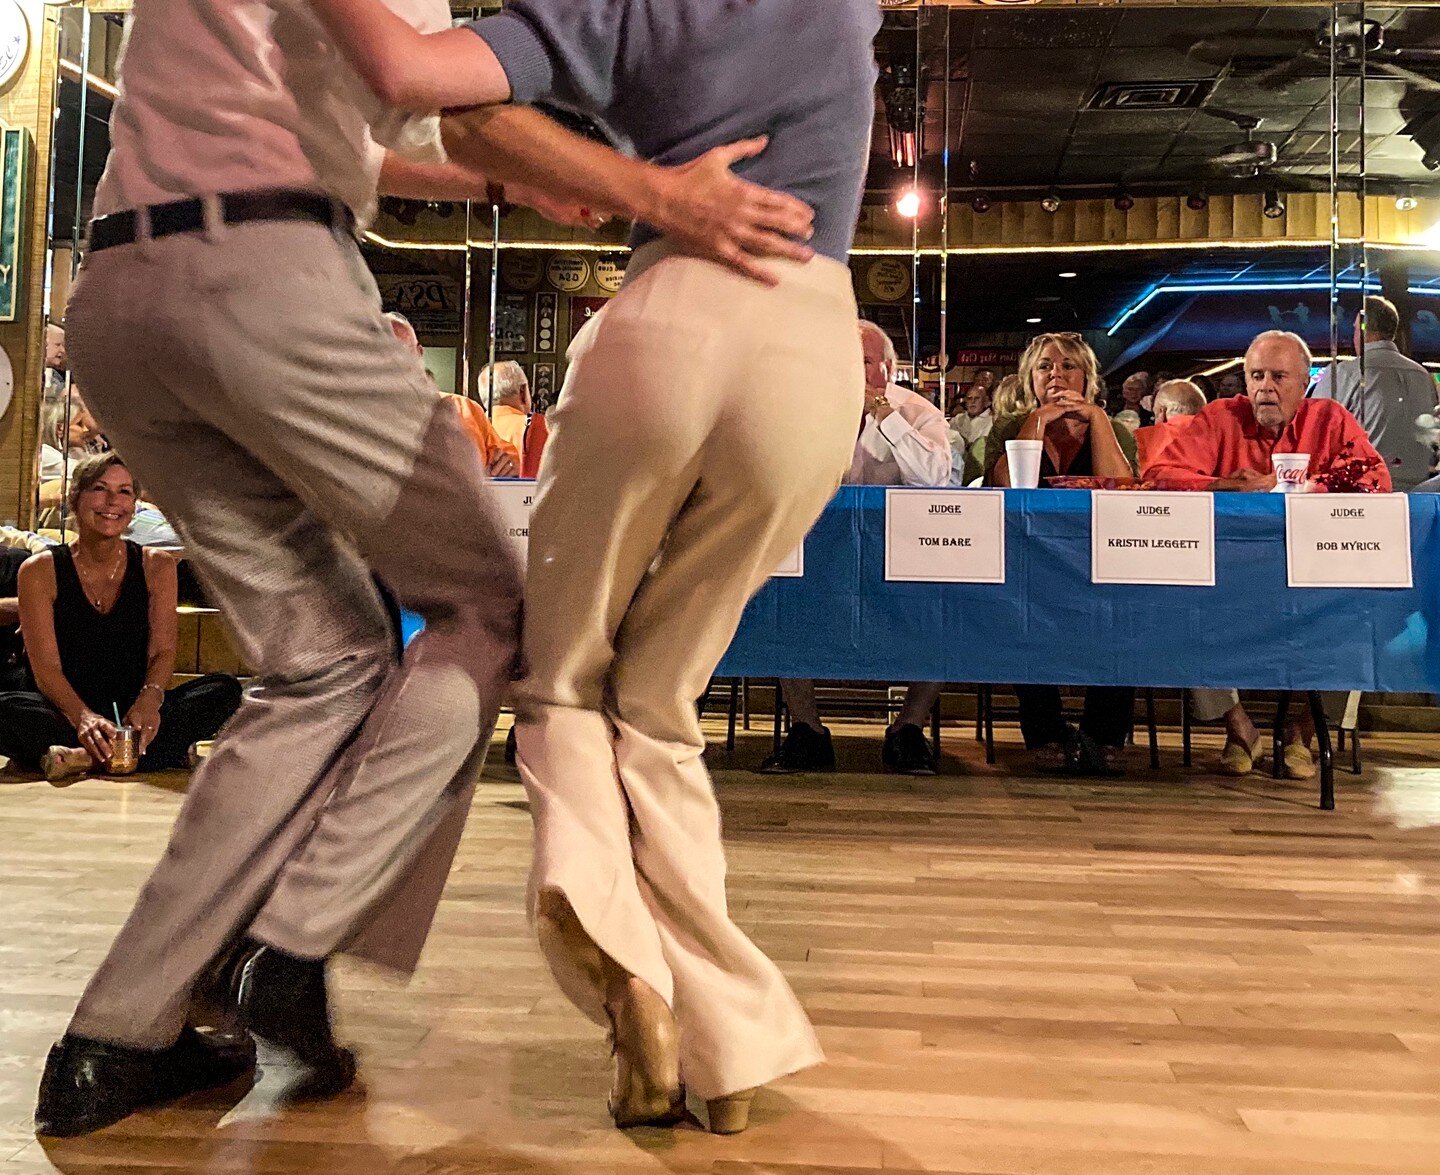 Shag competition at Fat Harold's Beach Club in North Myrtle Beach, where this swingy state dance originated in the Black community some time in the late Thirties. #bustingmoves #shagadelic